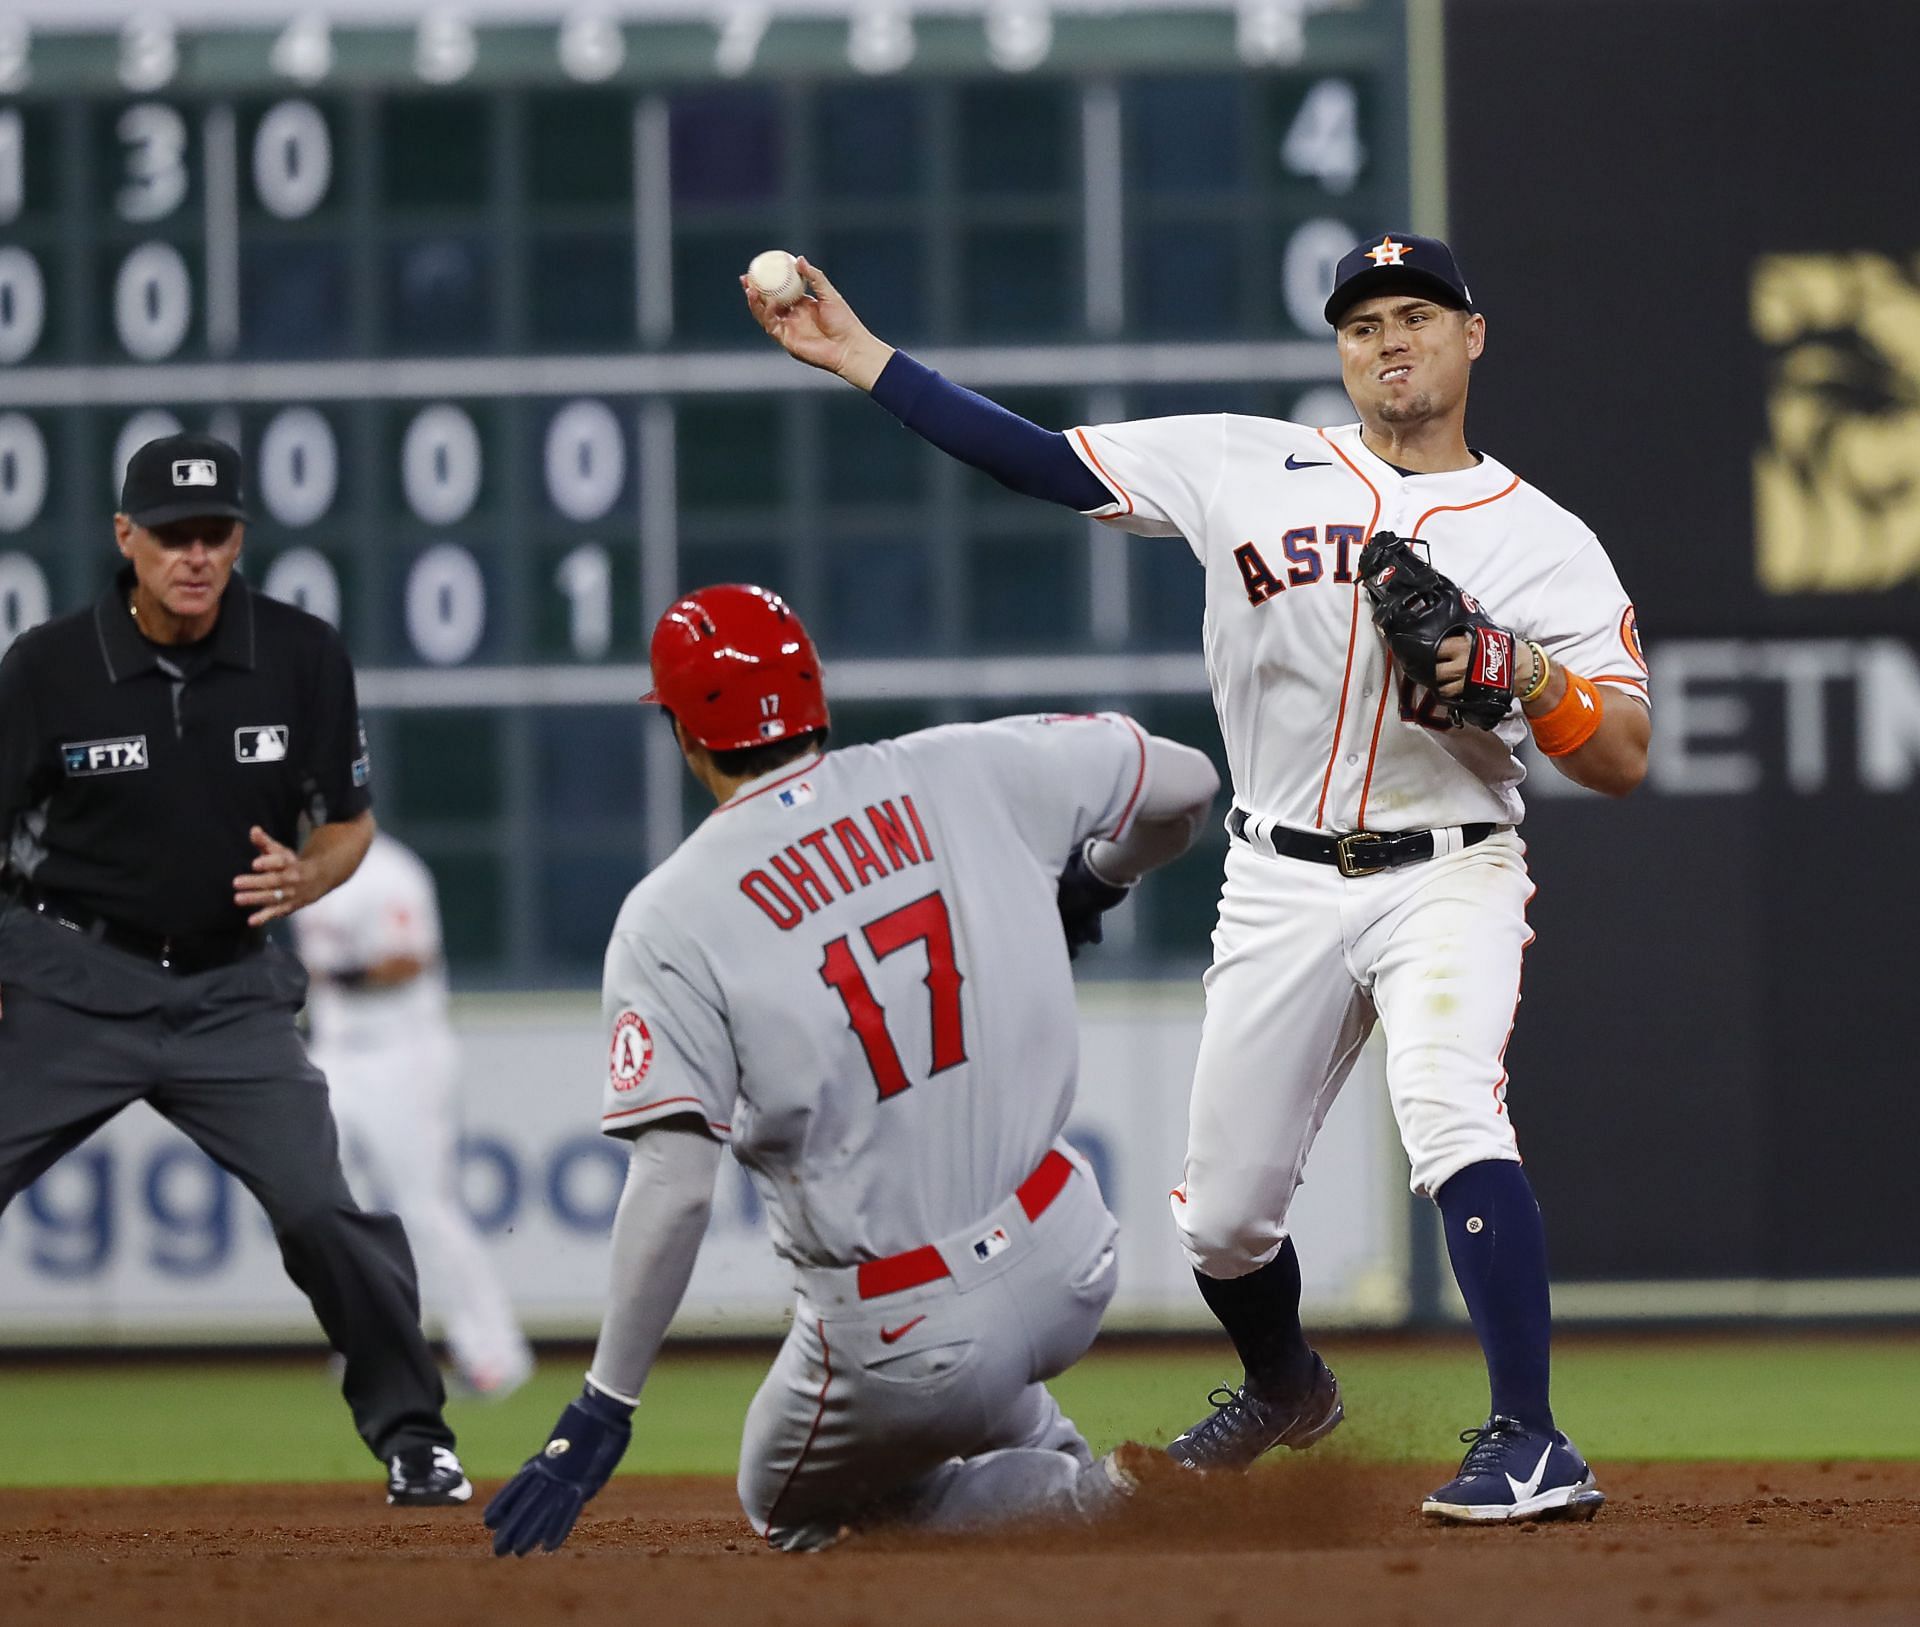 Aledmys Diaz of the Houston Astros throws to first base over Shohei Ohtani of the Los Angeles Angels.